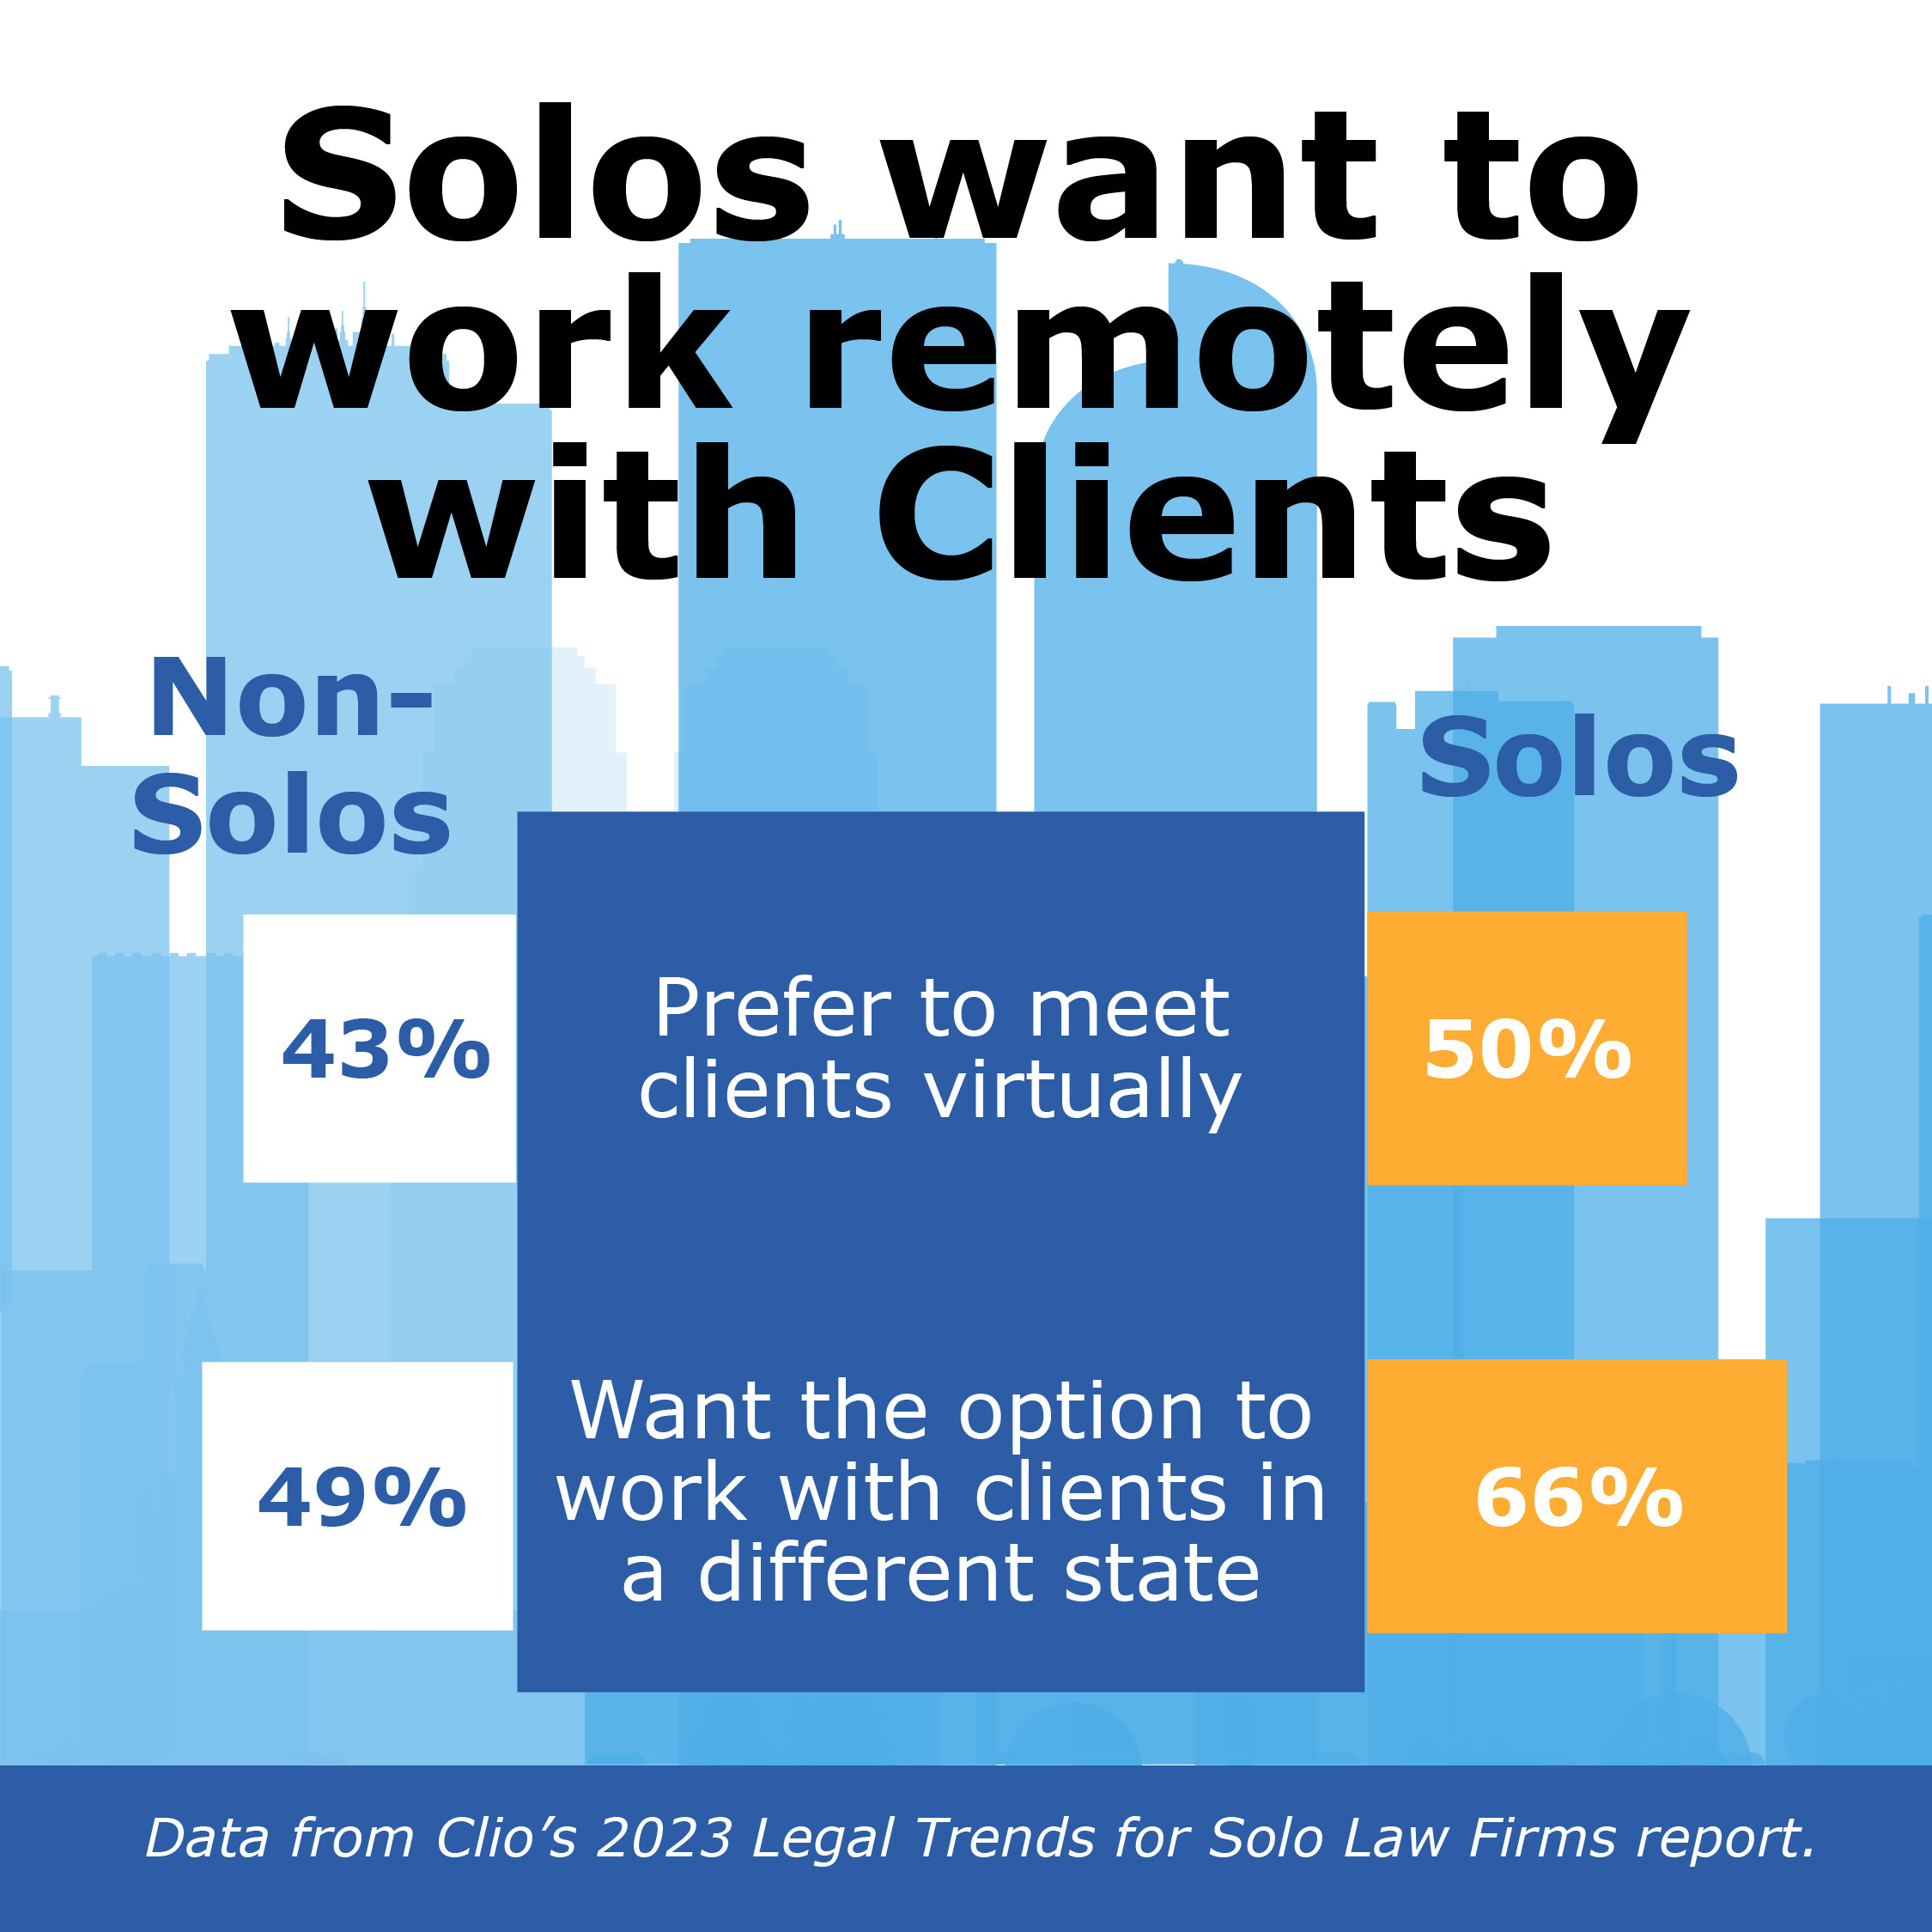 Data from Clio’s 2023 Legal Trends for Solo Law Firms report shows solo attorneys may want to work with clients remotely more than non-solo attorneys. Clio found that 50% of solos prefer to meet with their clients virtually versus 43% of non-solos; and 66% of solos prefer the option to work with clients in different states versus 49% of non-solos. 